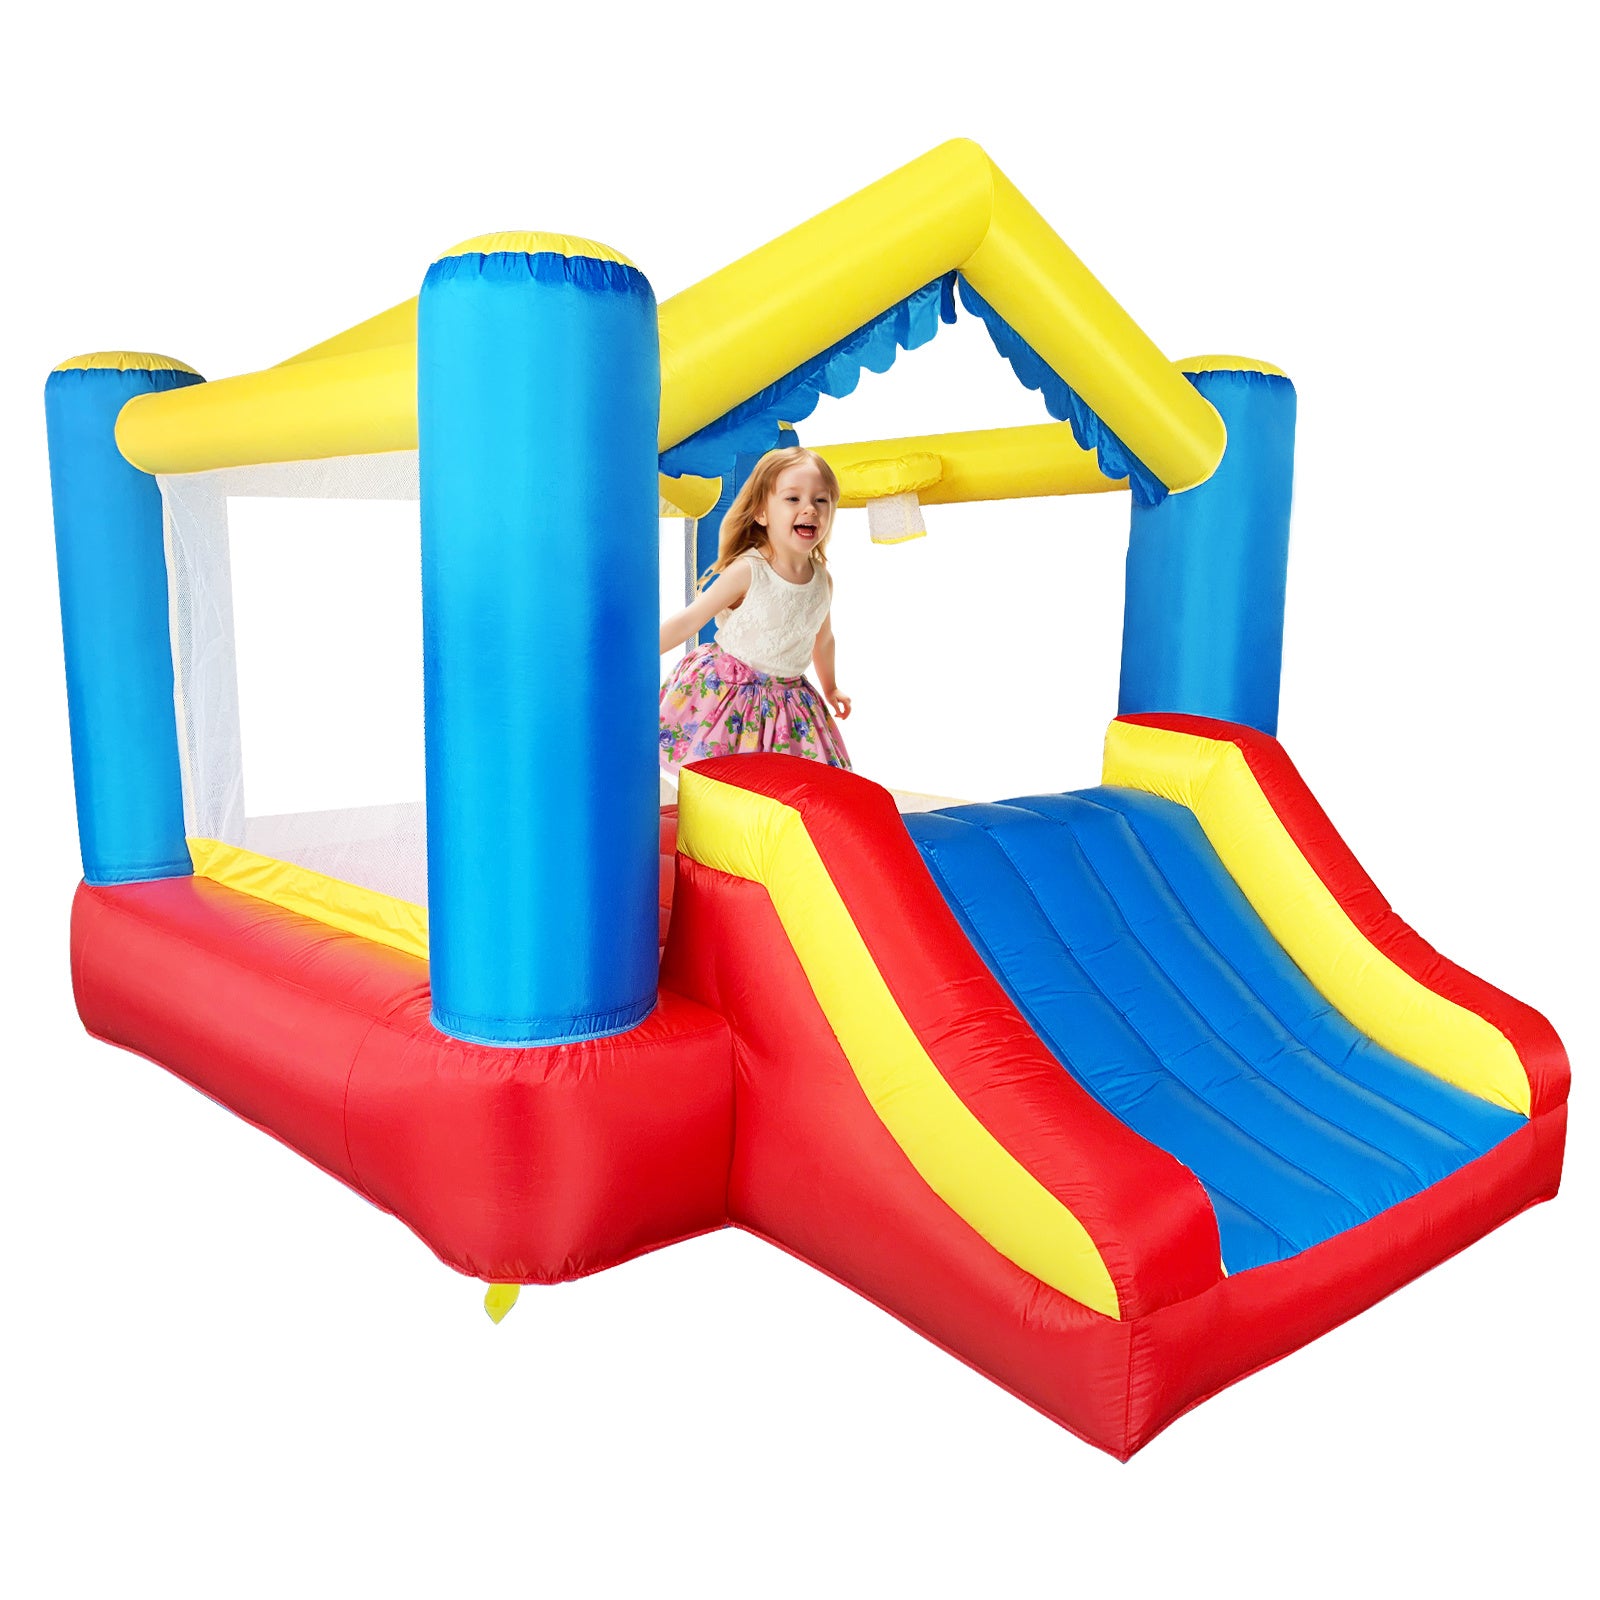 Bounce House Inflatable Bounce House with Basketball Hoop Royal Bouncer for Kids, 12 x 9 x 8 ft H, w/ UL Certified Air Blower